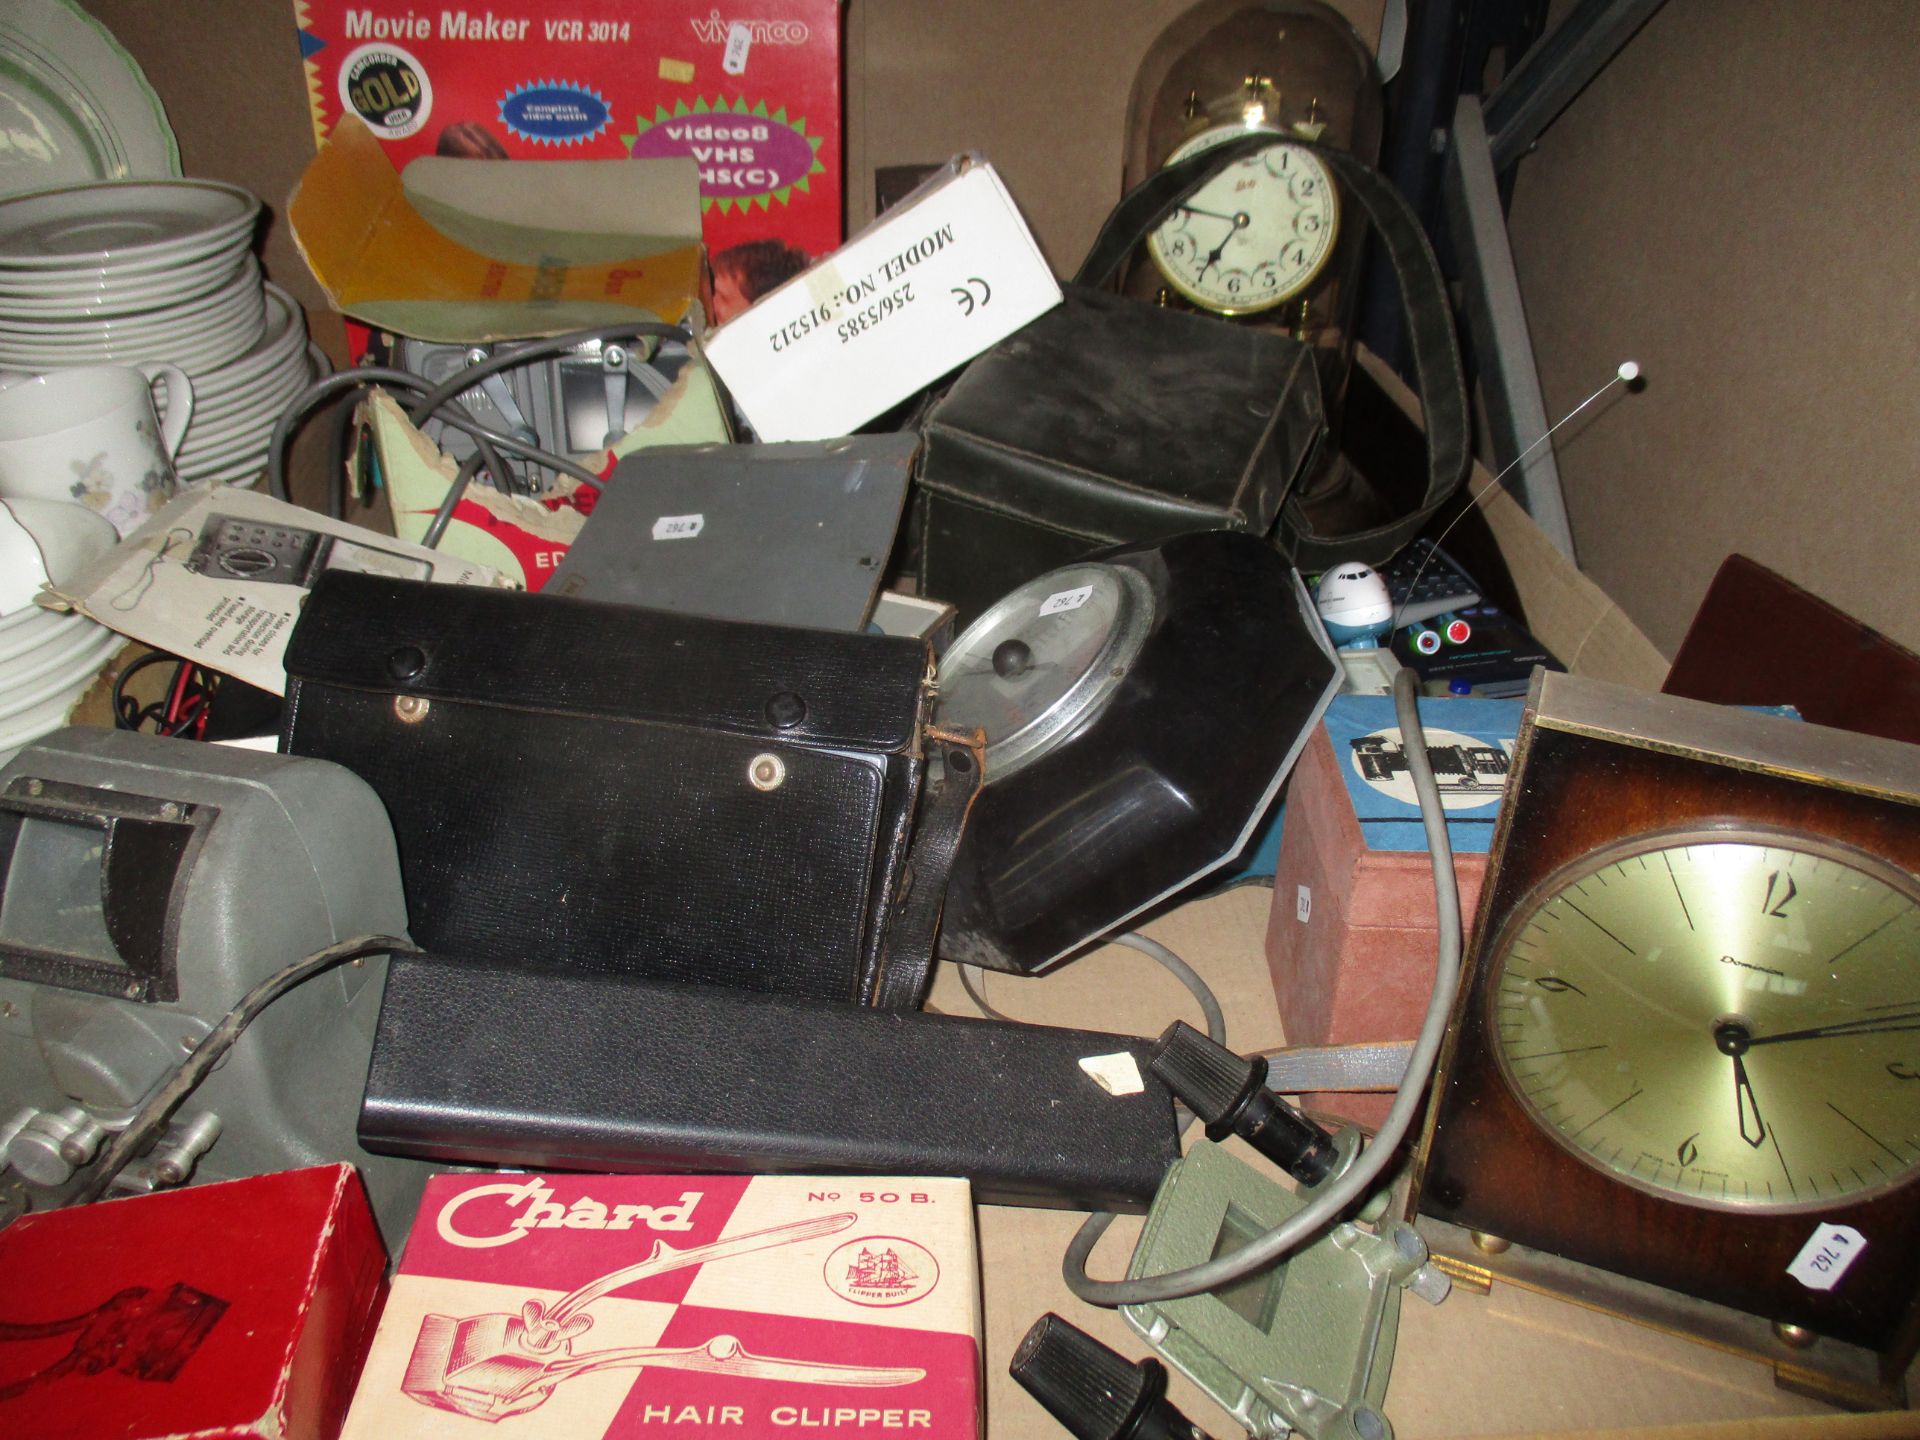 Contents to tray - an assortment of items including vintage hair clippers, Dominion mantel clock,